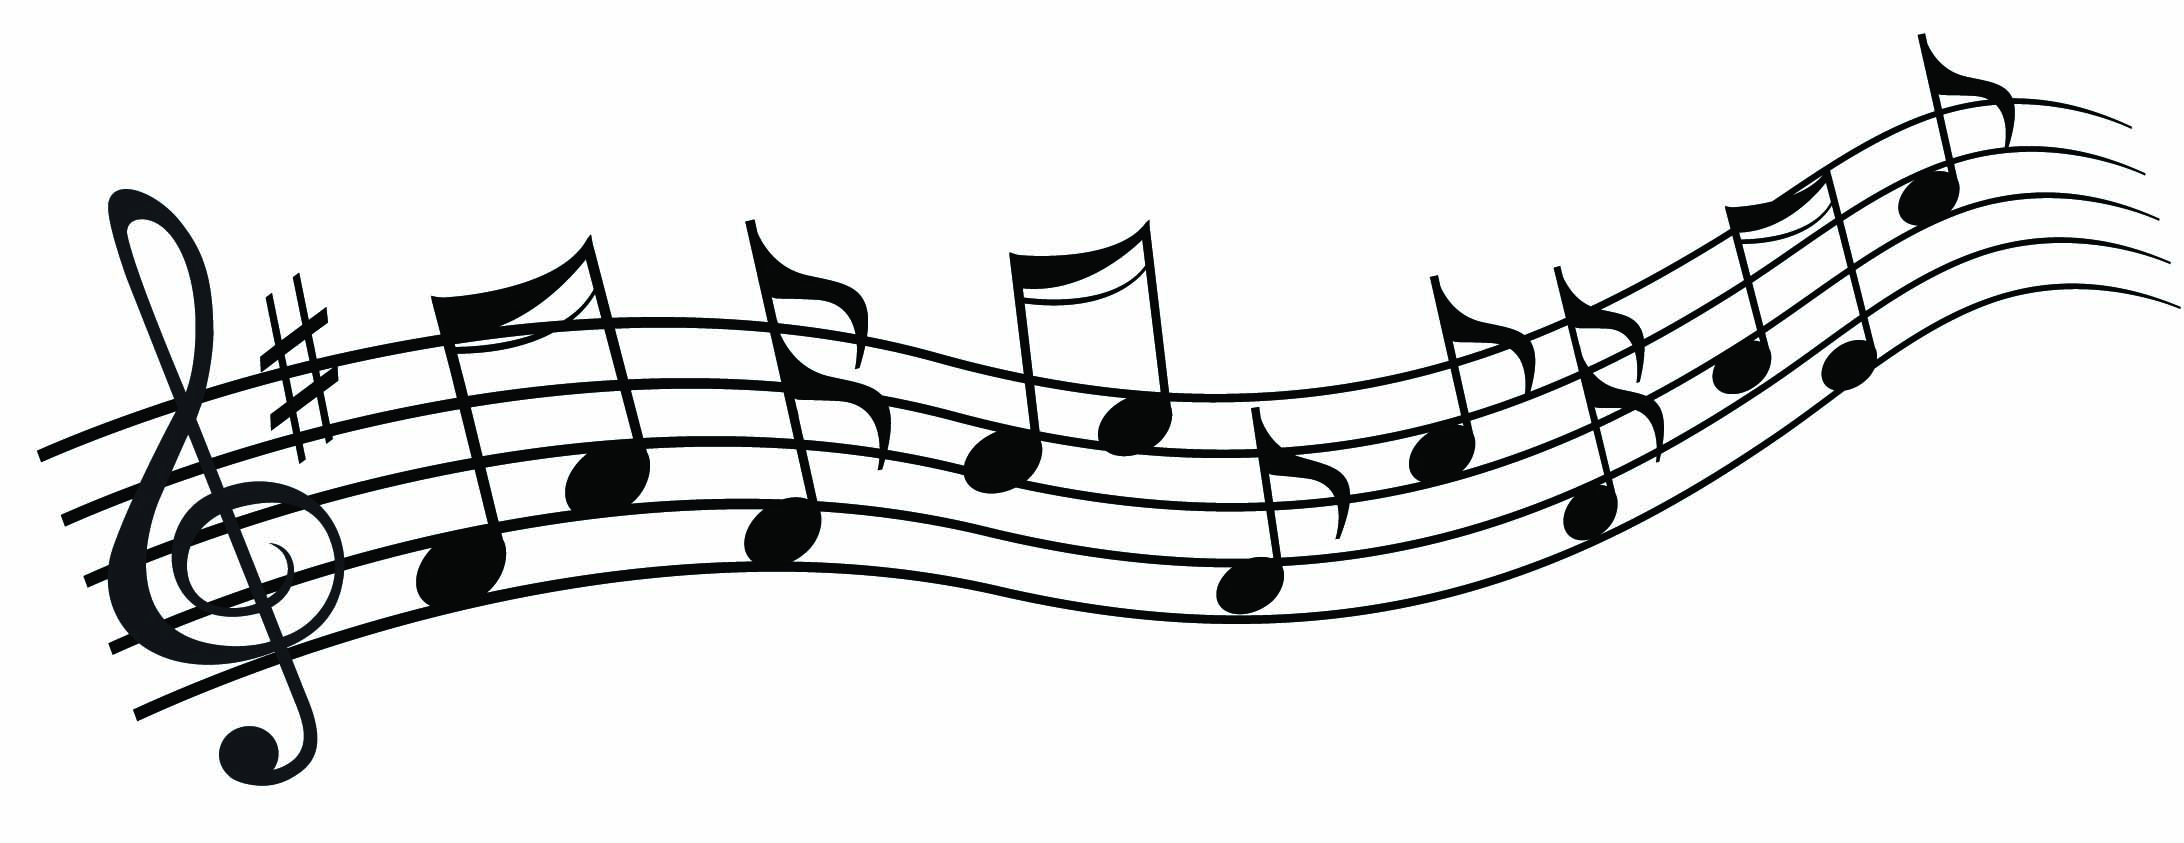 music notes clipart black and